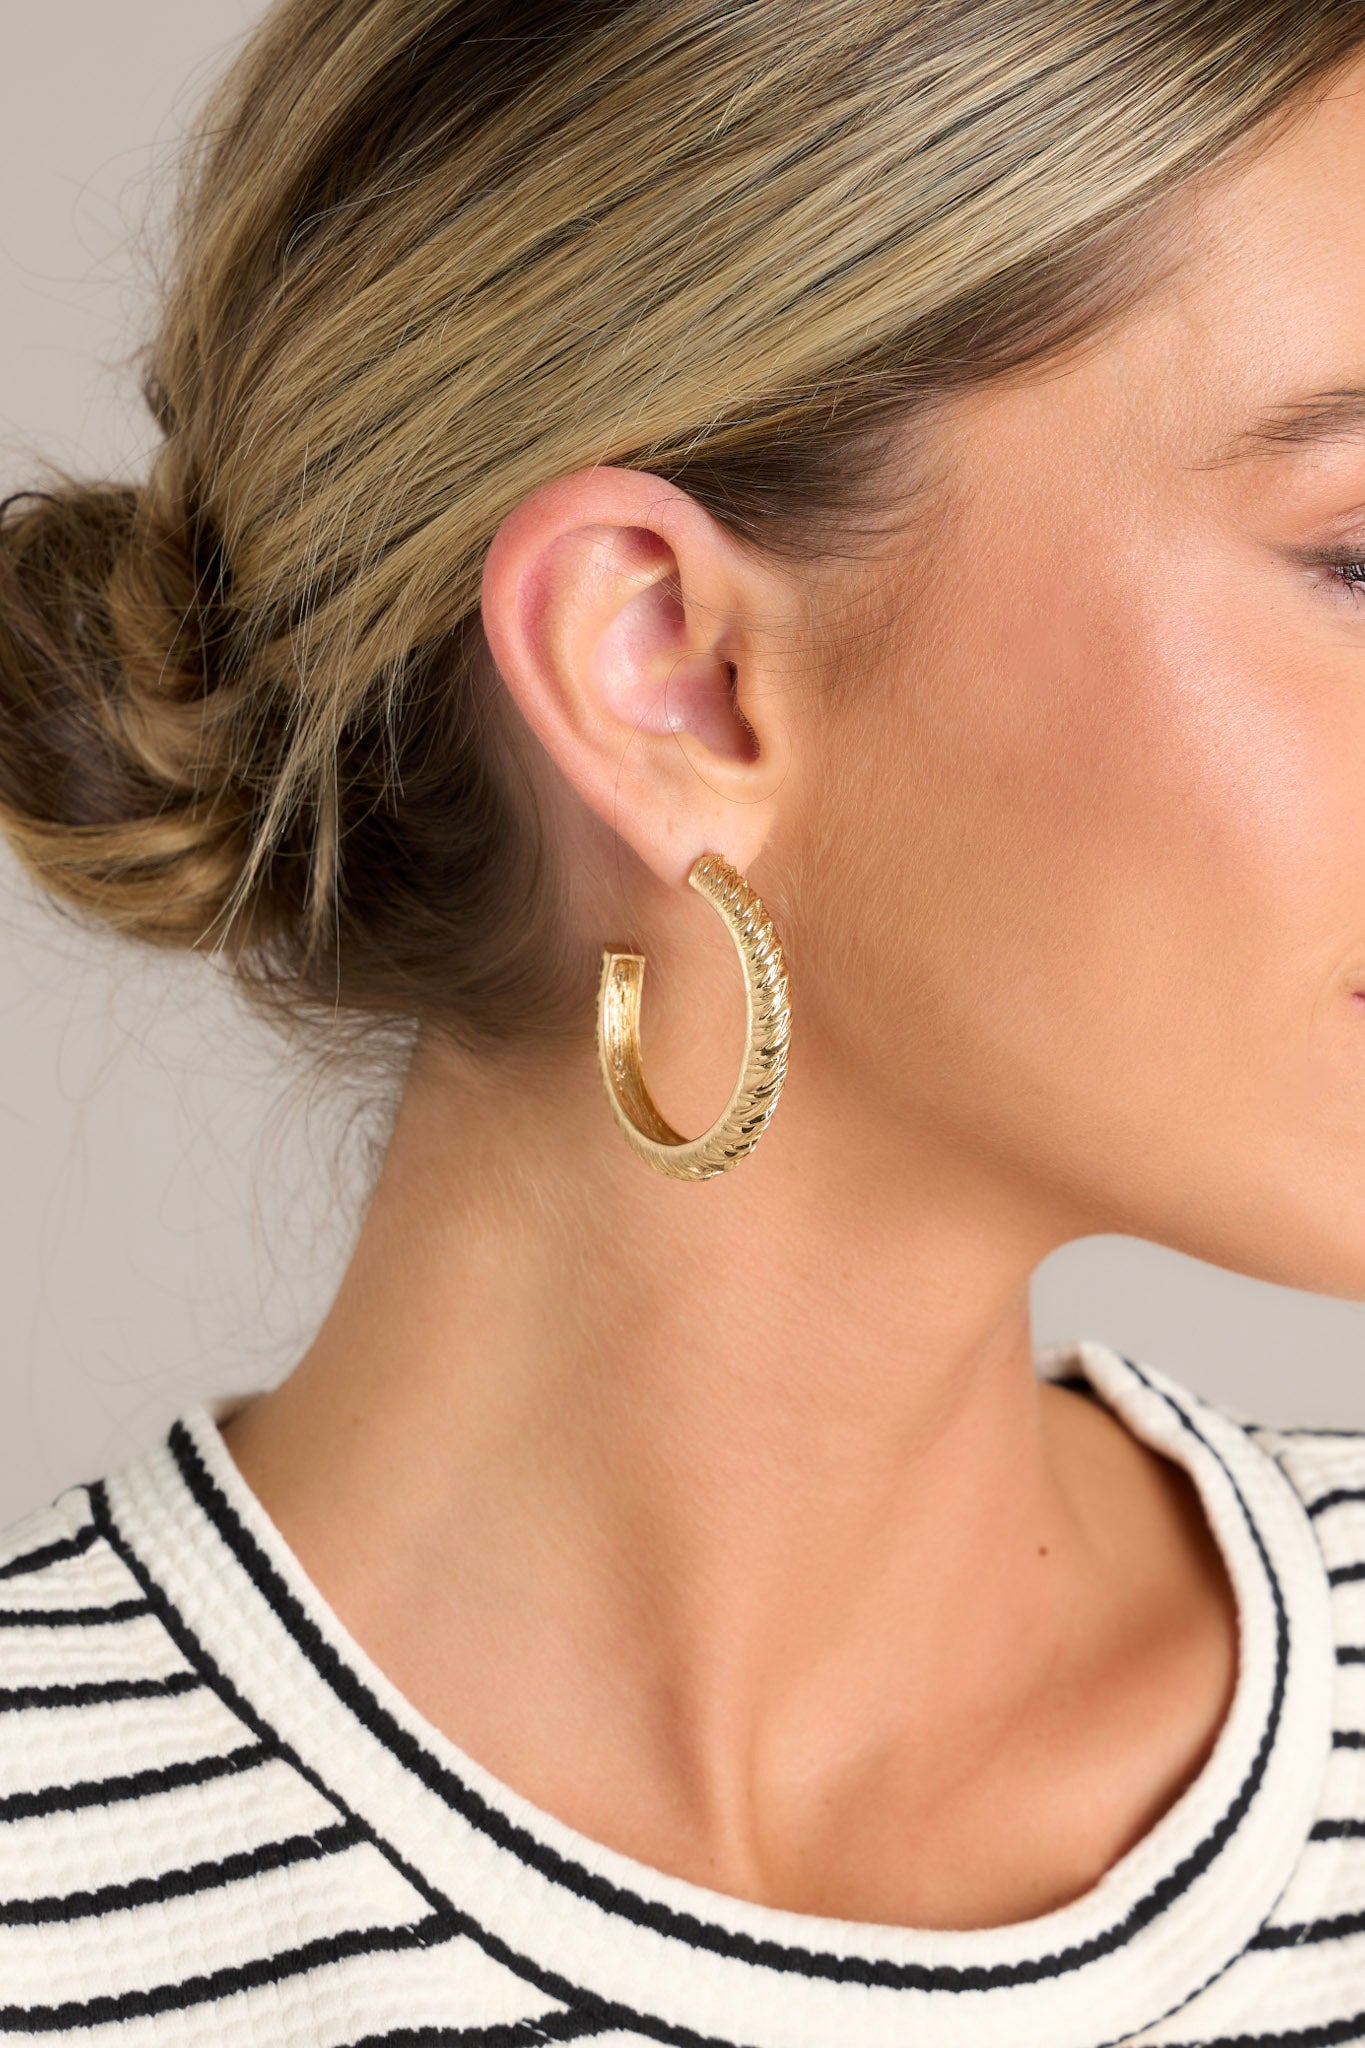 Close up view of these gold hoop earrings that feature a gold finish, a grooved textured design, and secure post backings.